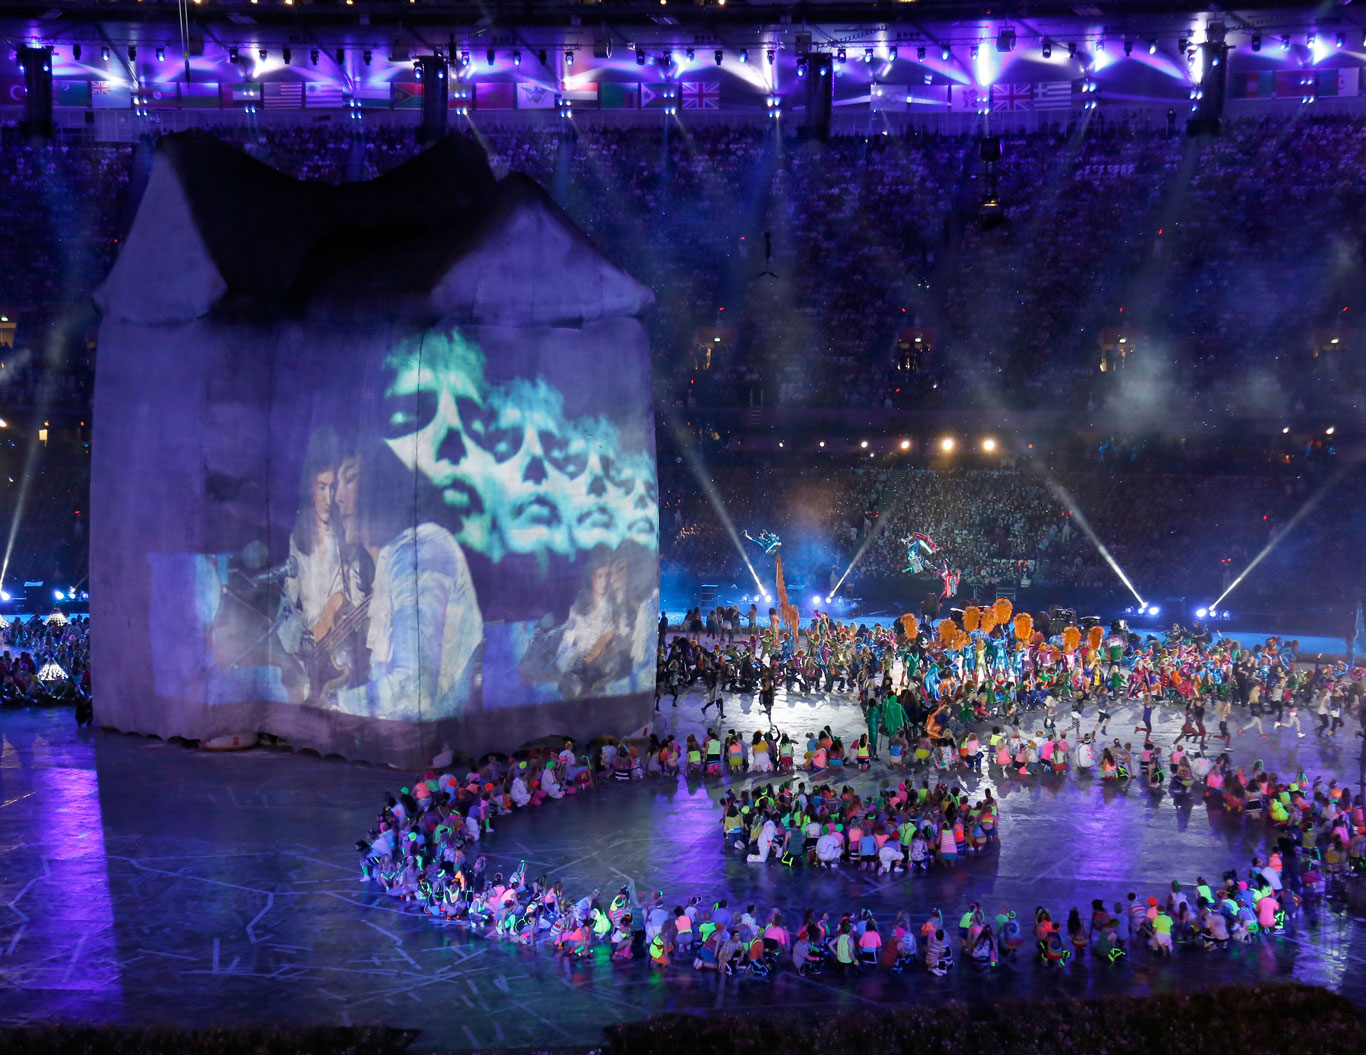  Segment on rock music at the Opening Ceremonies of the London Olympics. 